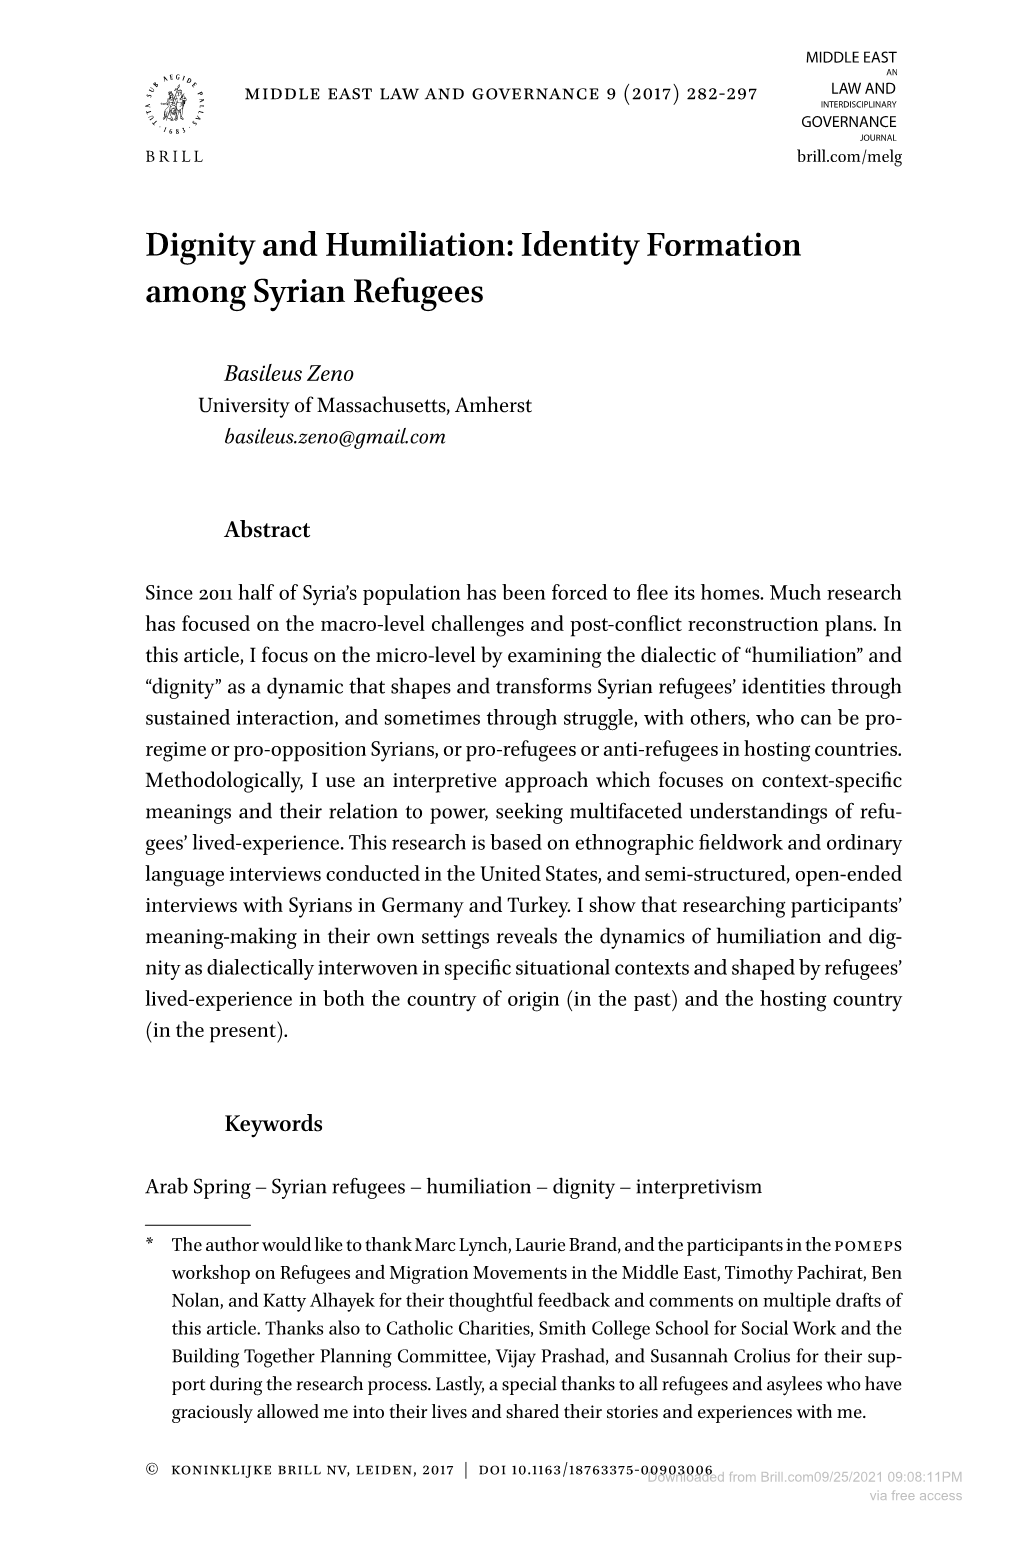 Dignity and Humiliation: Identity Formation Among Syrian Refugees